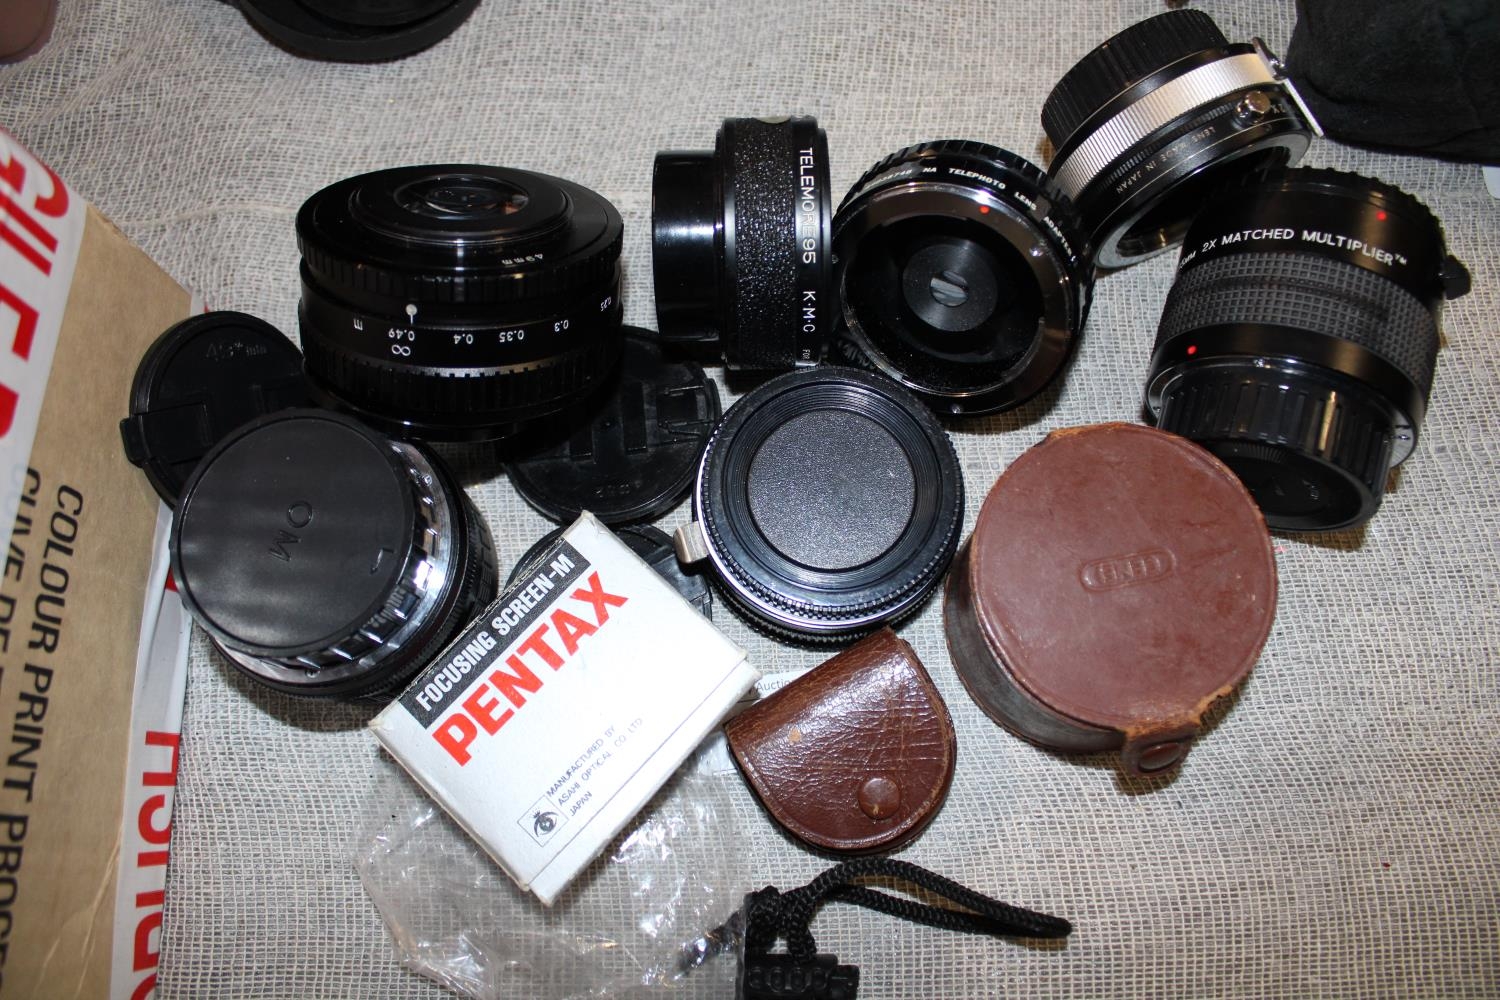 A selection of assorted camera lenses and filters